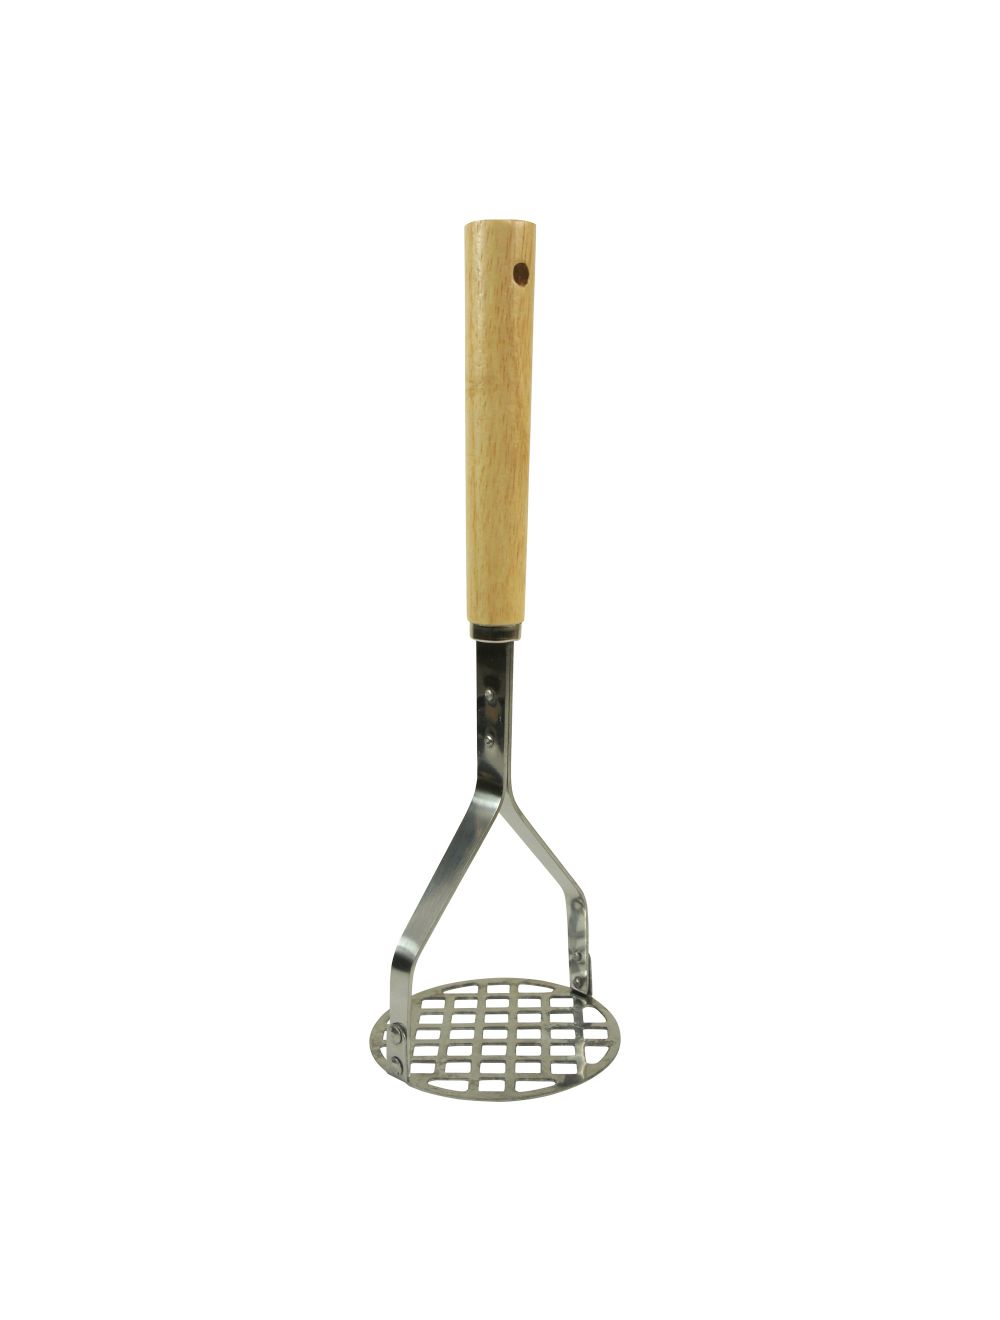 Thunder Group 24 Chrome Plated Square-Faced Potato Masher with Wood Handle